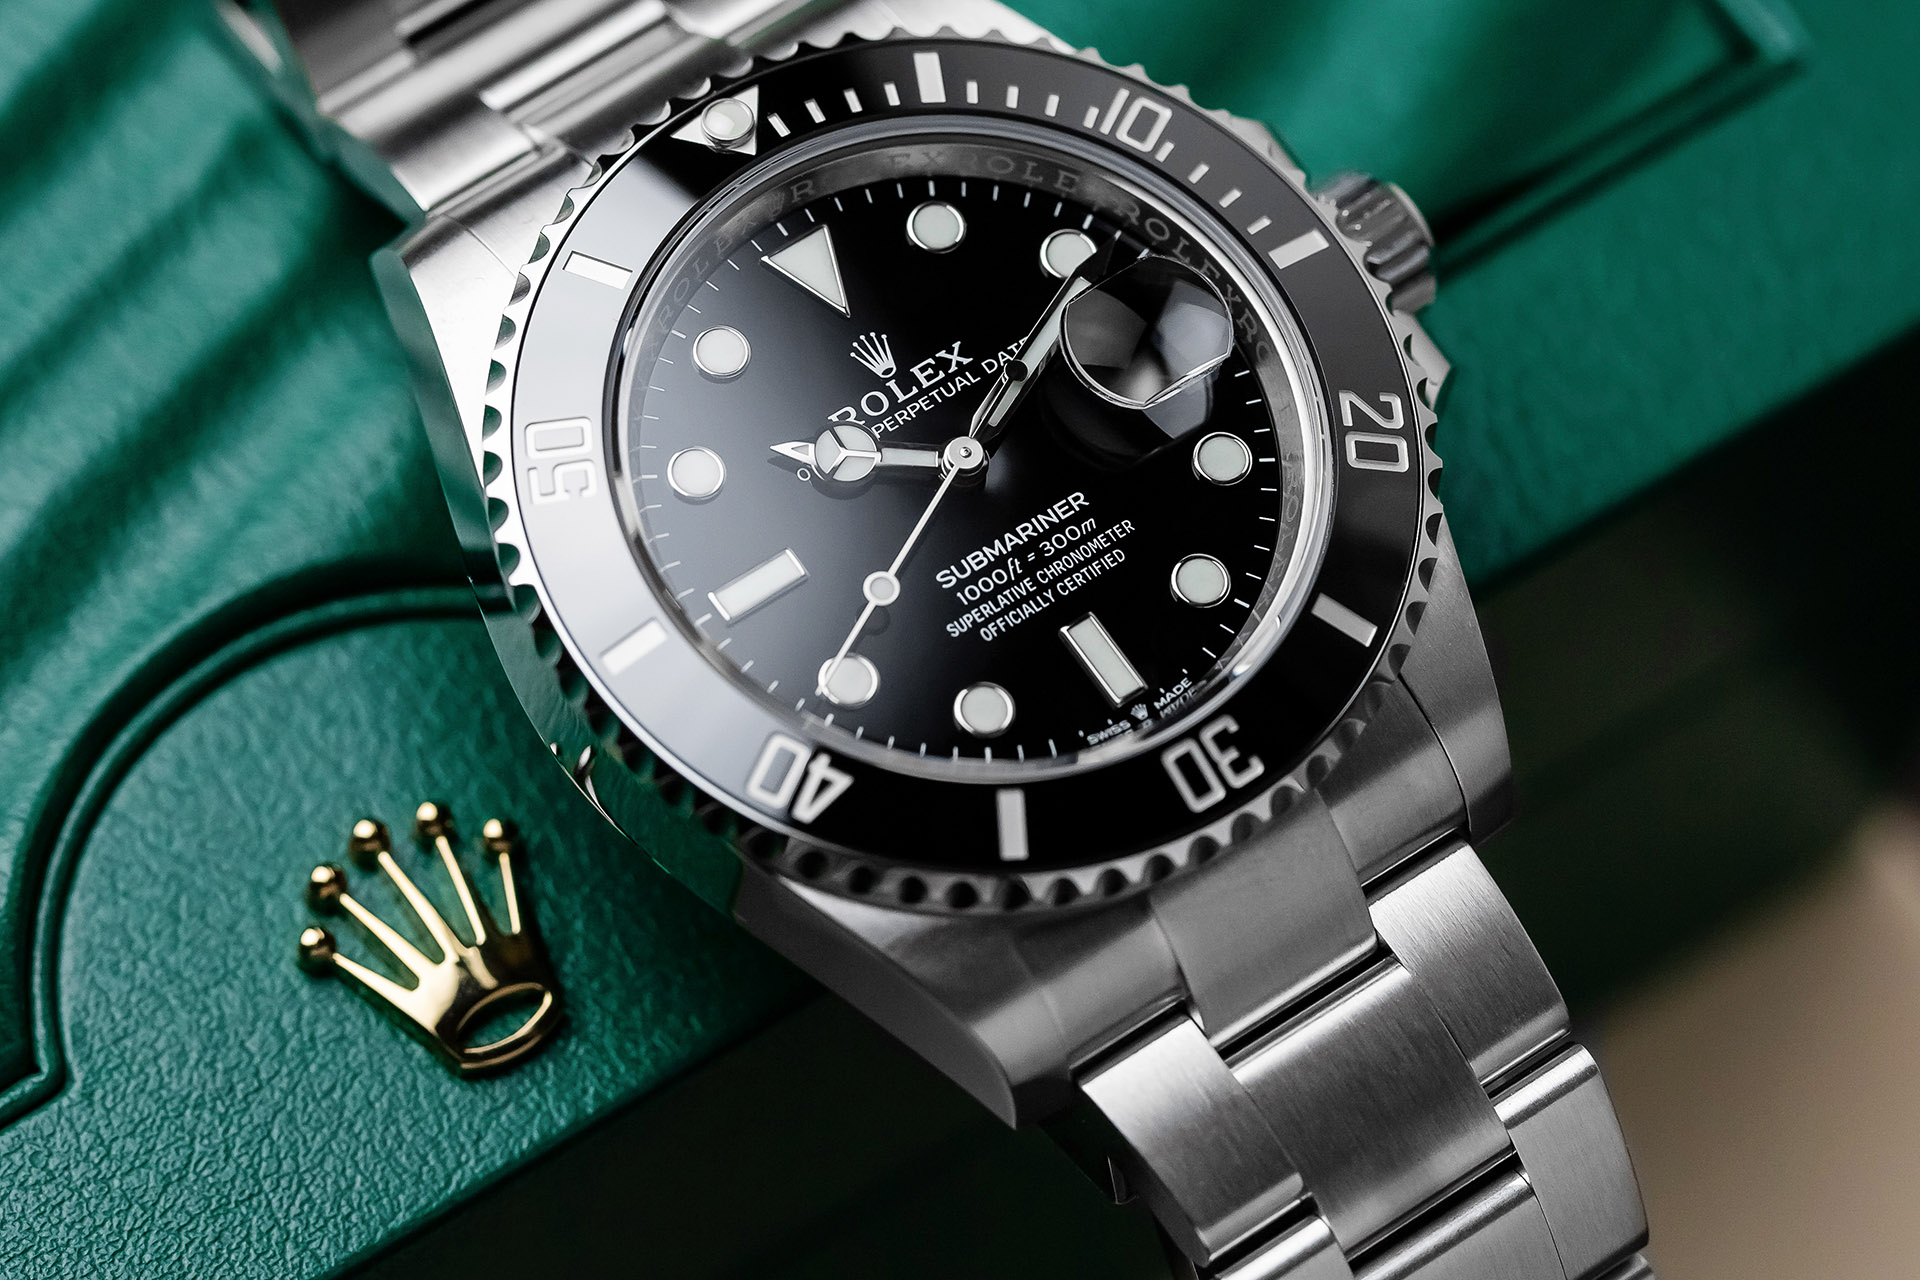 Pre-owned Rolex Watch - 5 Step Buying Guide-nextbuild.com.vn